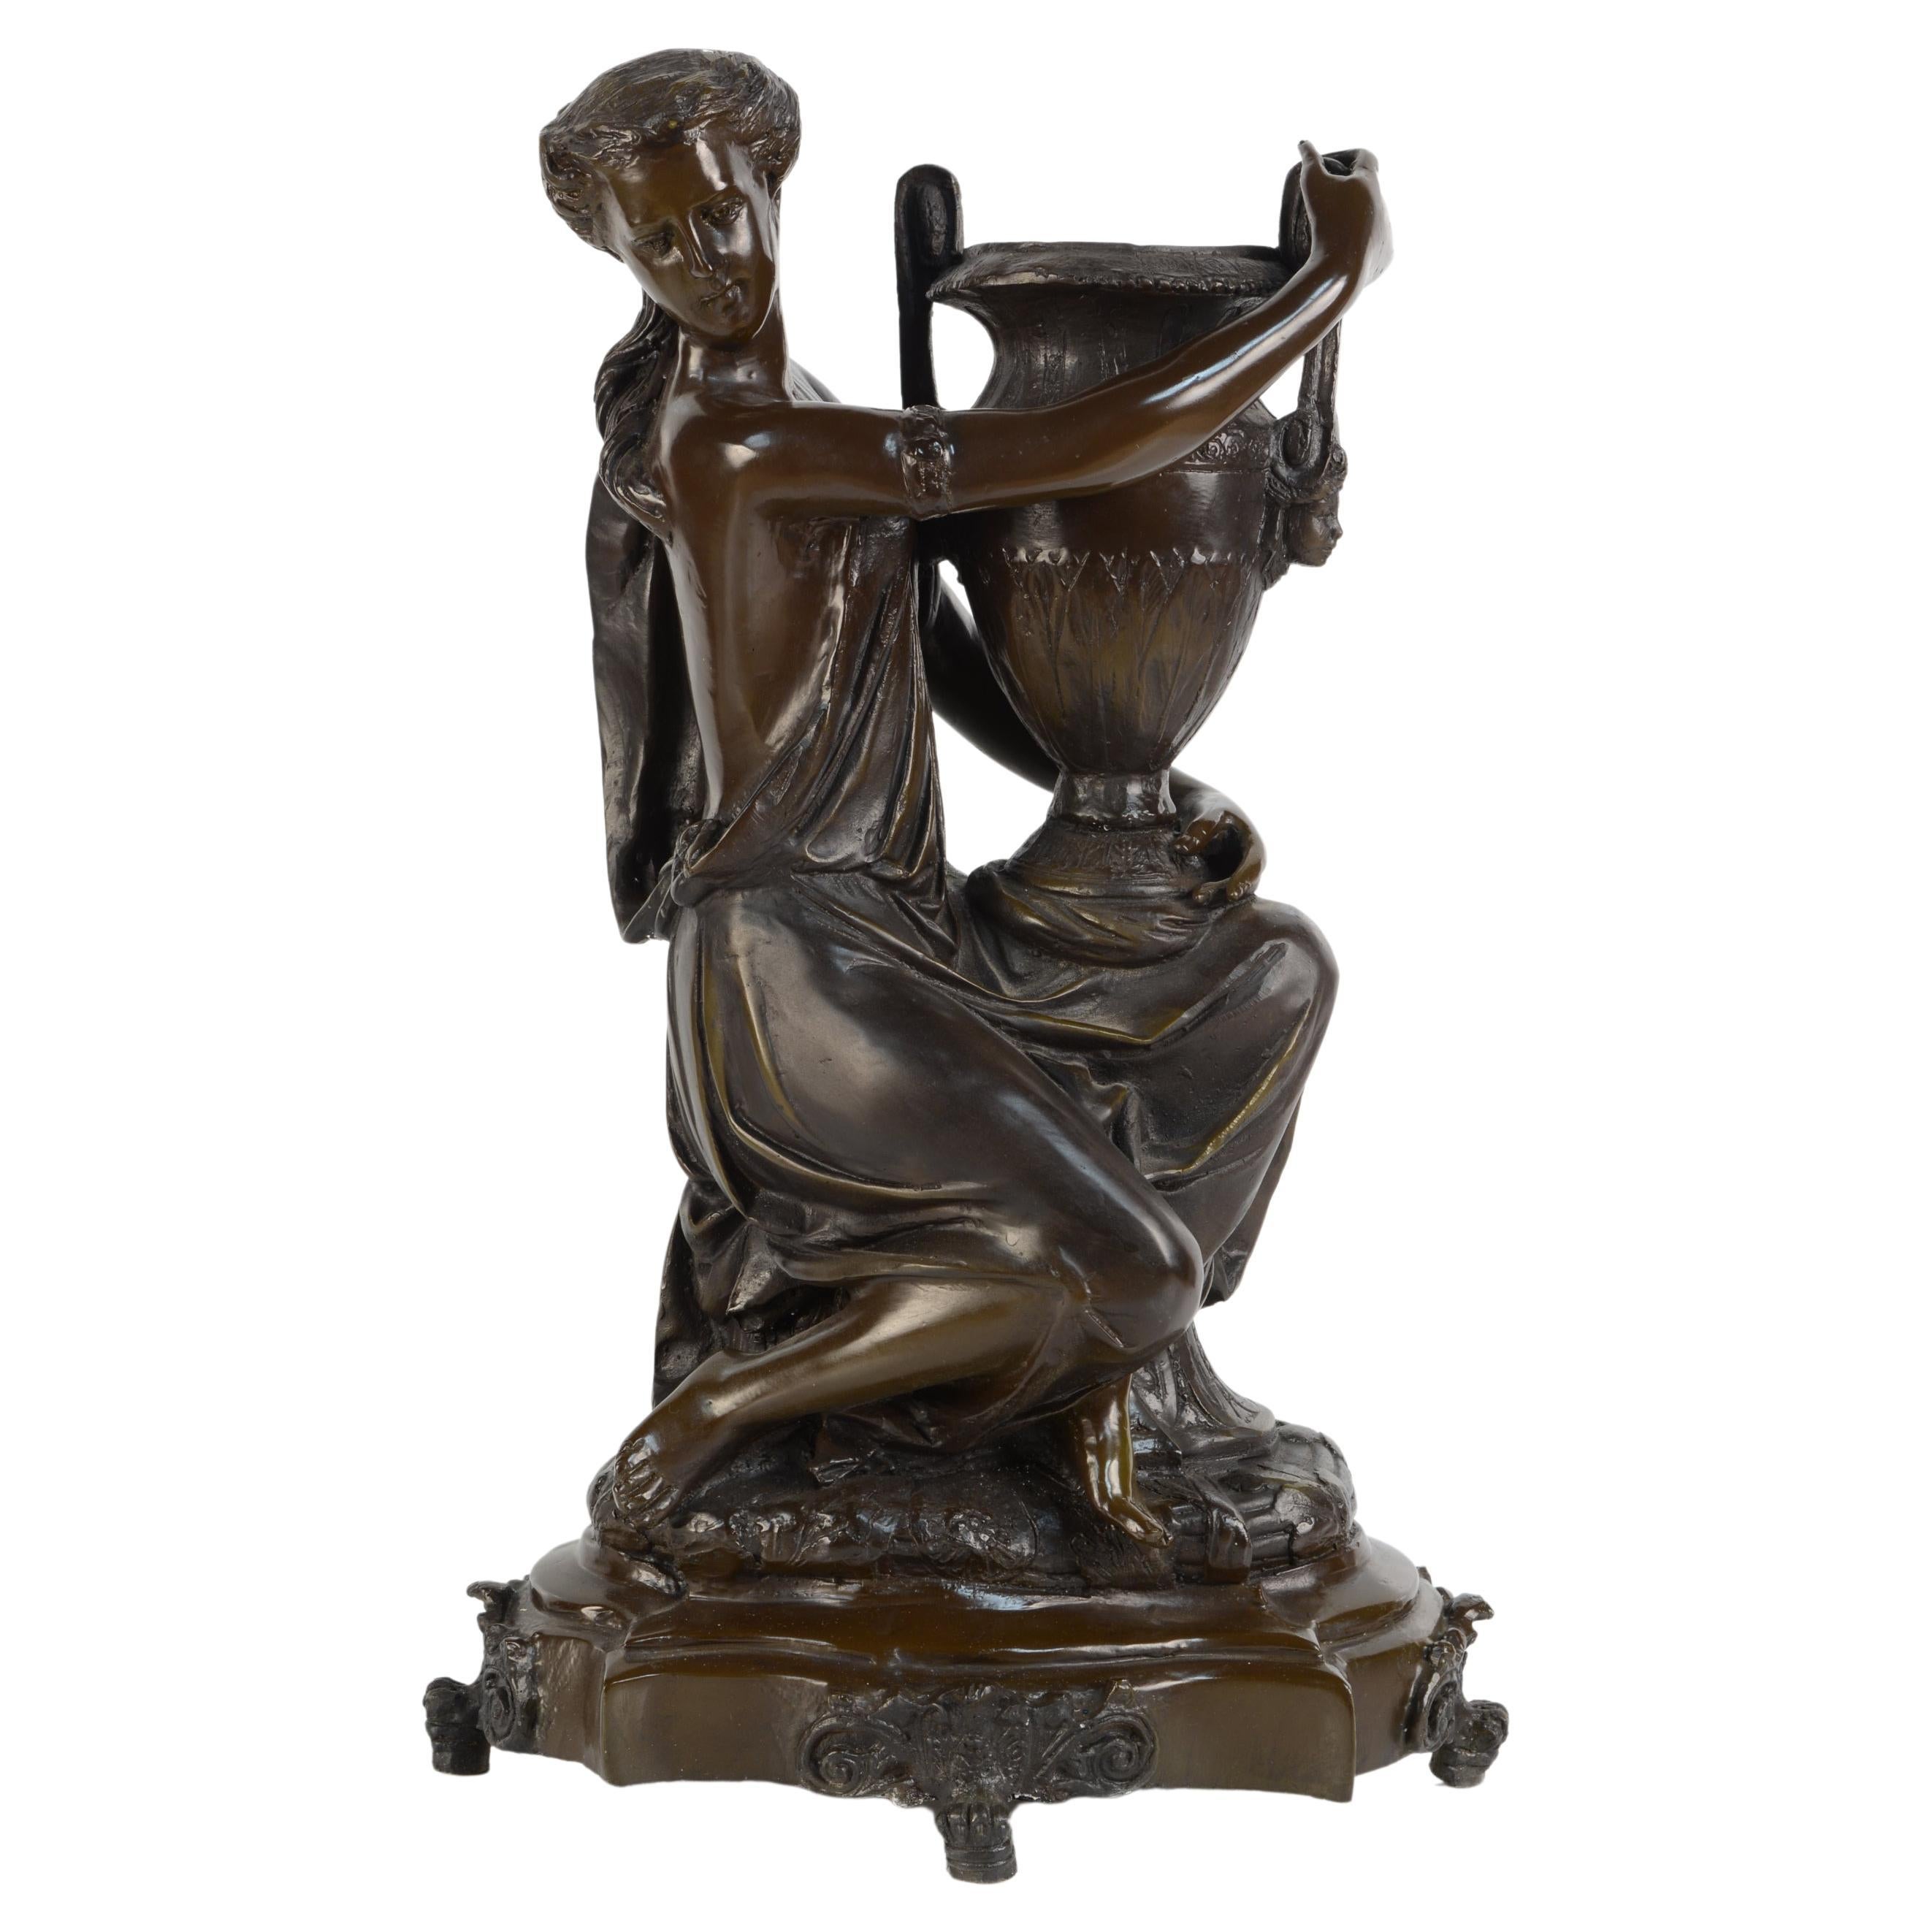 Bronze Sculpture, "Lady with amphora", 20th Century at 1stDibs